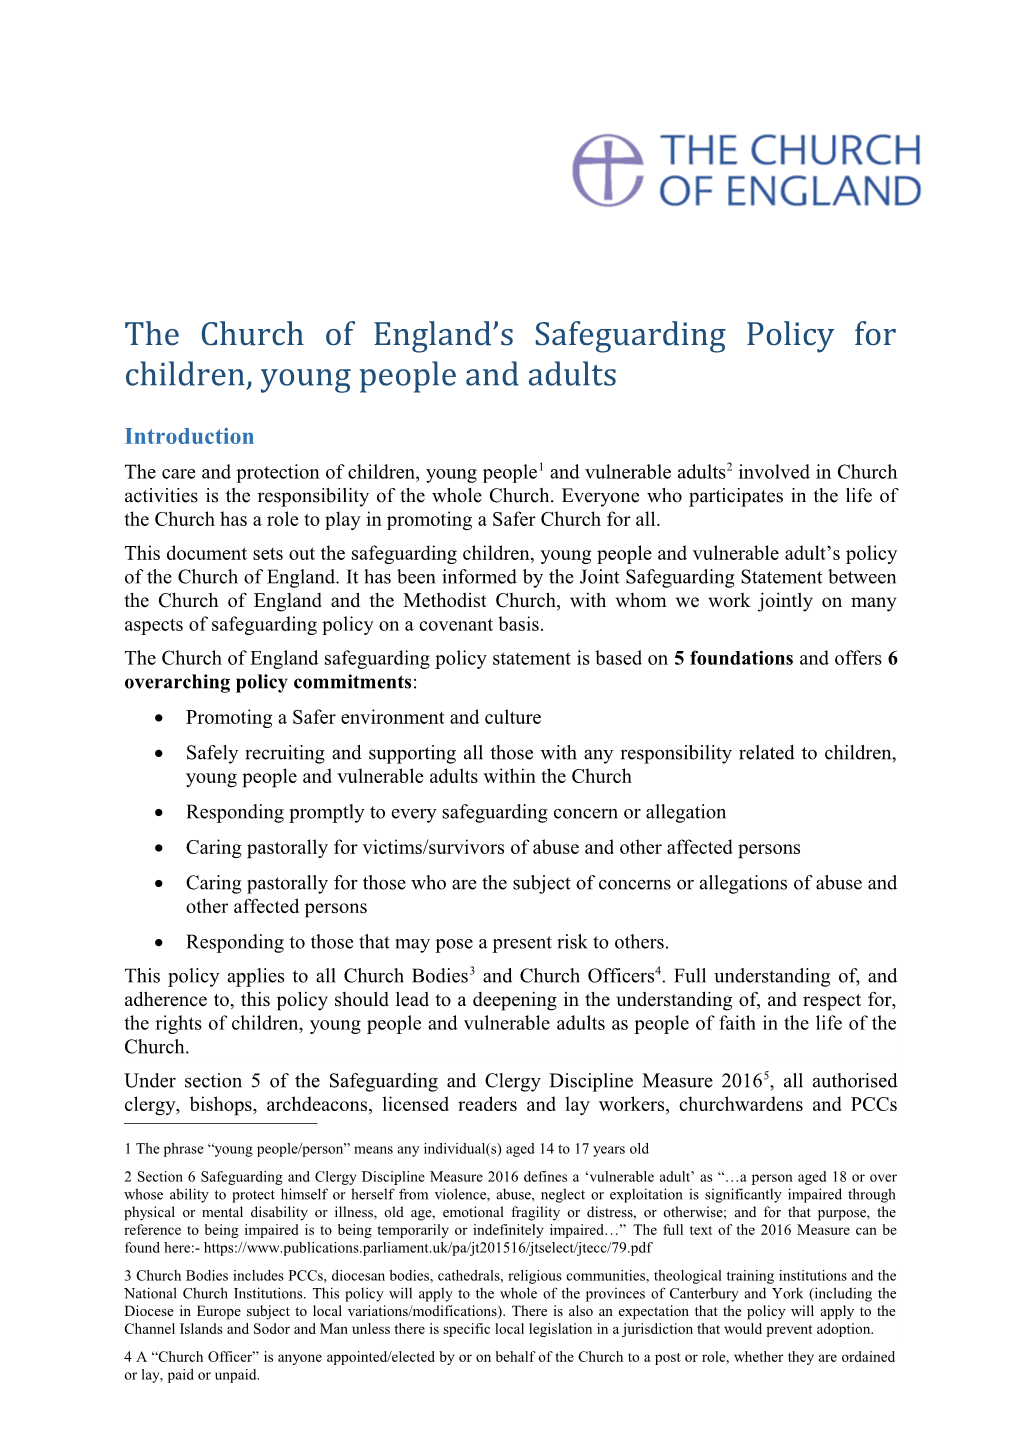 The Church of England S Safeguarding Policy for Children, Young People and Adults